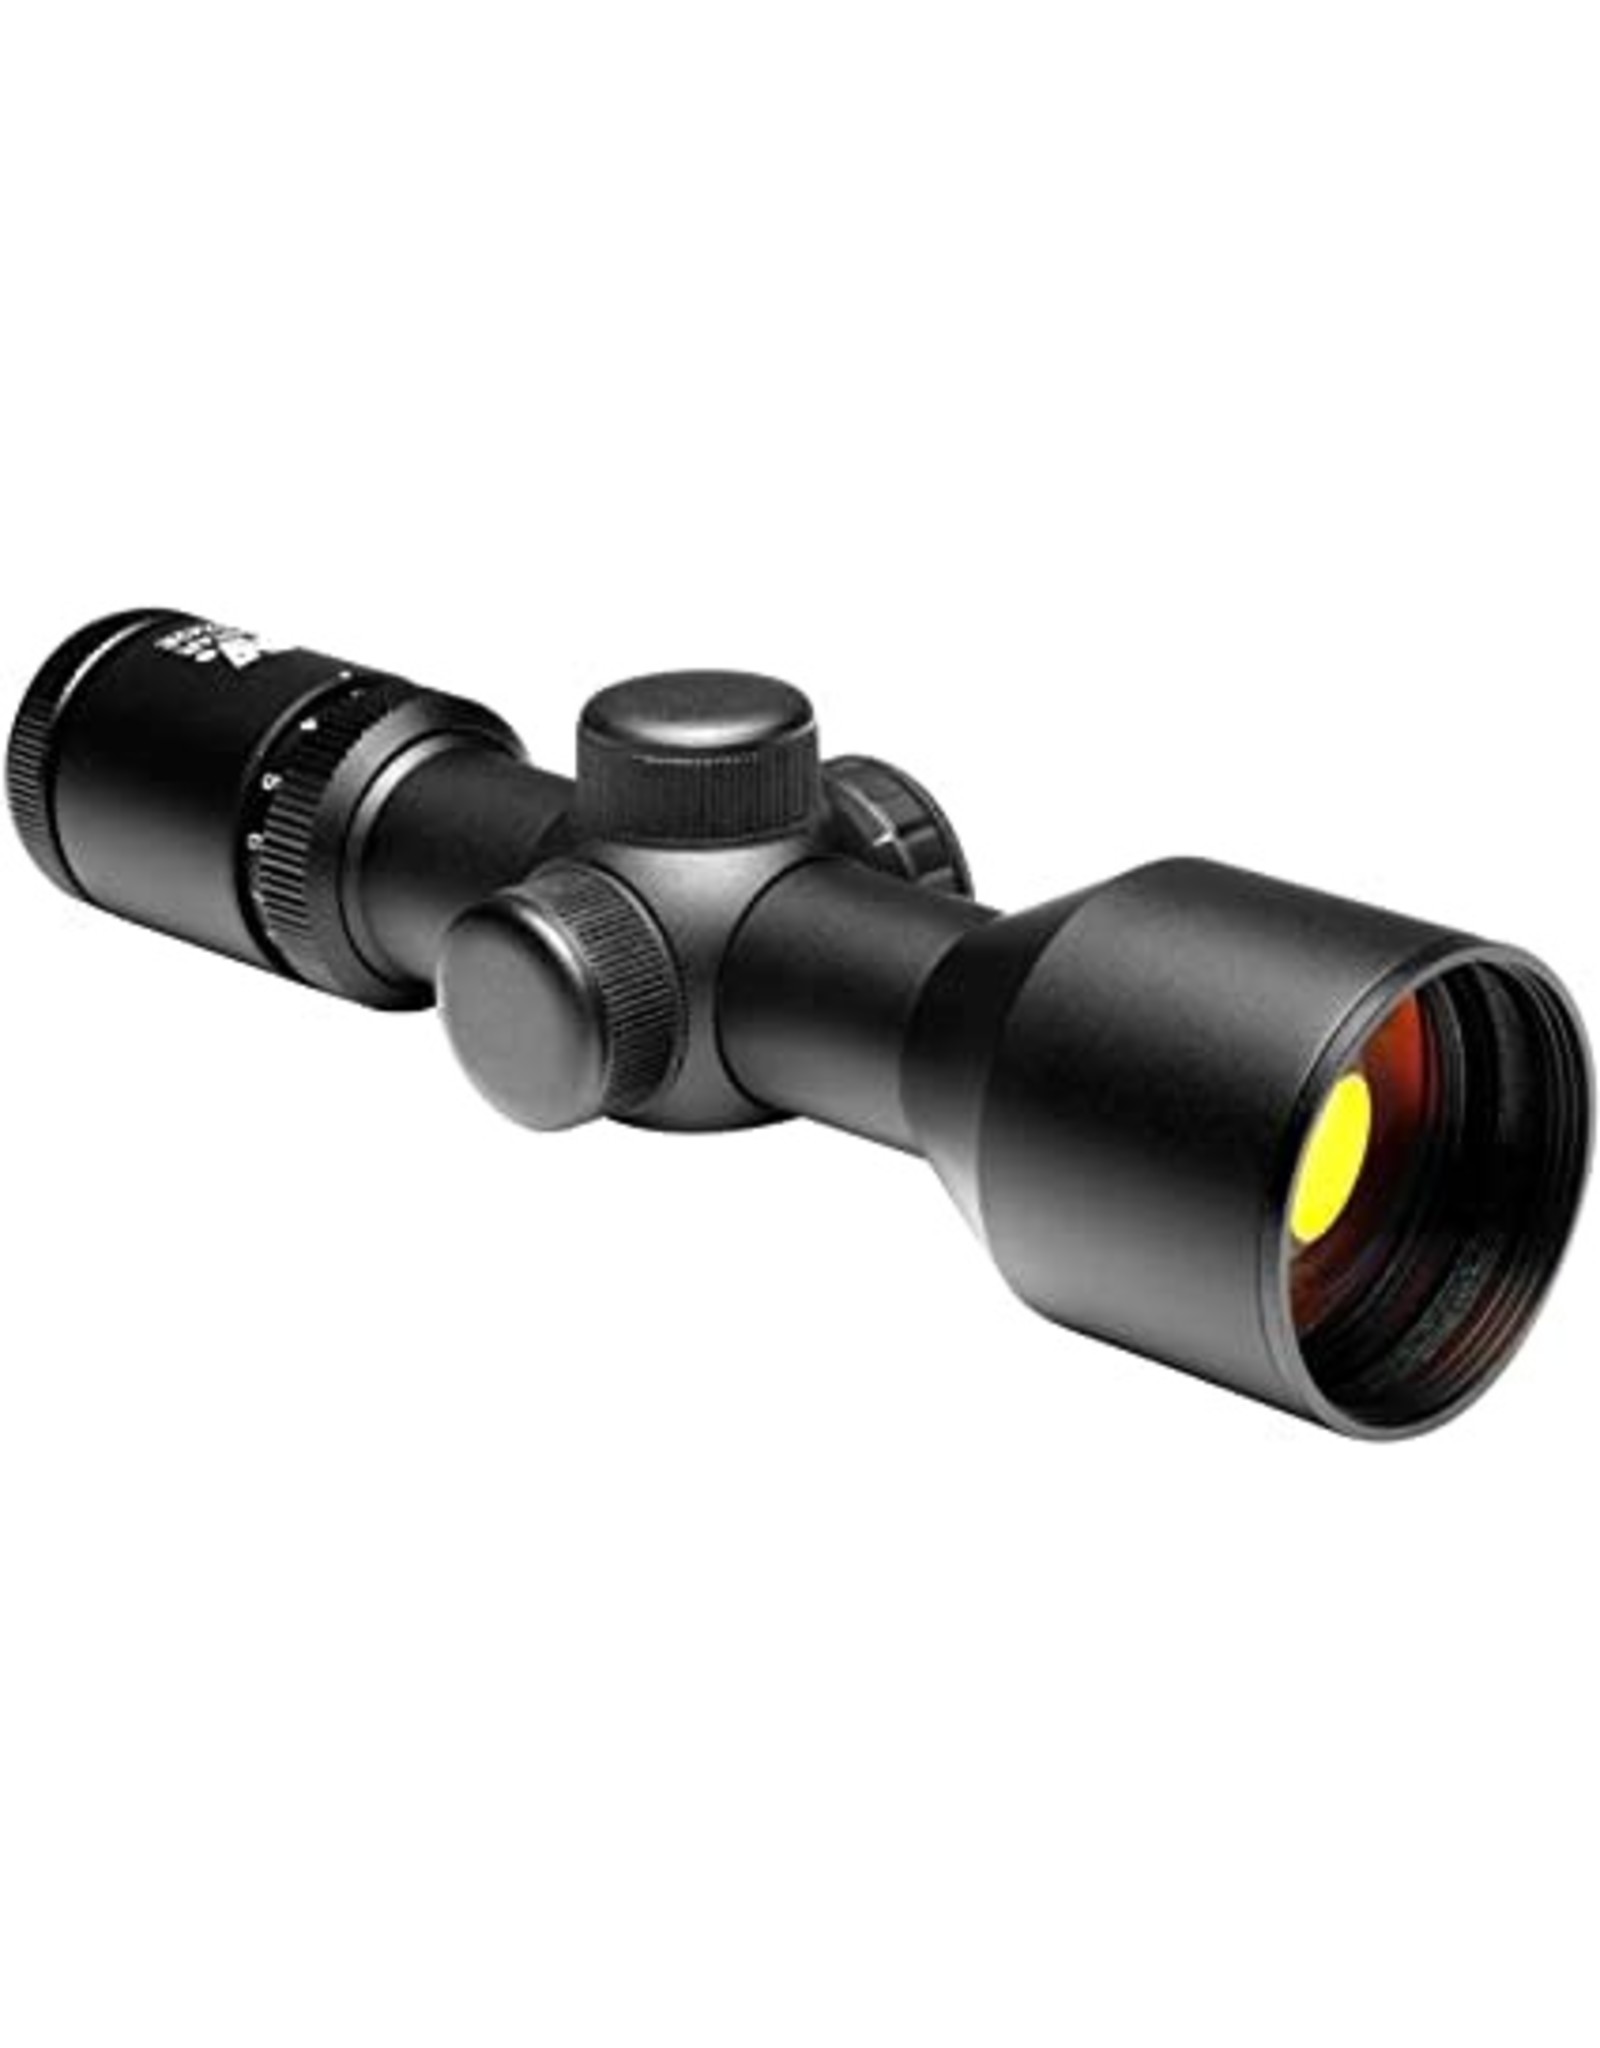 NcSTAR NCStar Tac/3-9X42E RED ILL. COMPACT SCOPE/RUBY LENS  SEC3924R